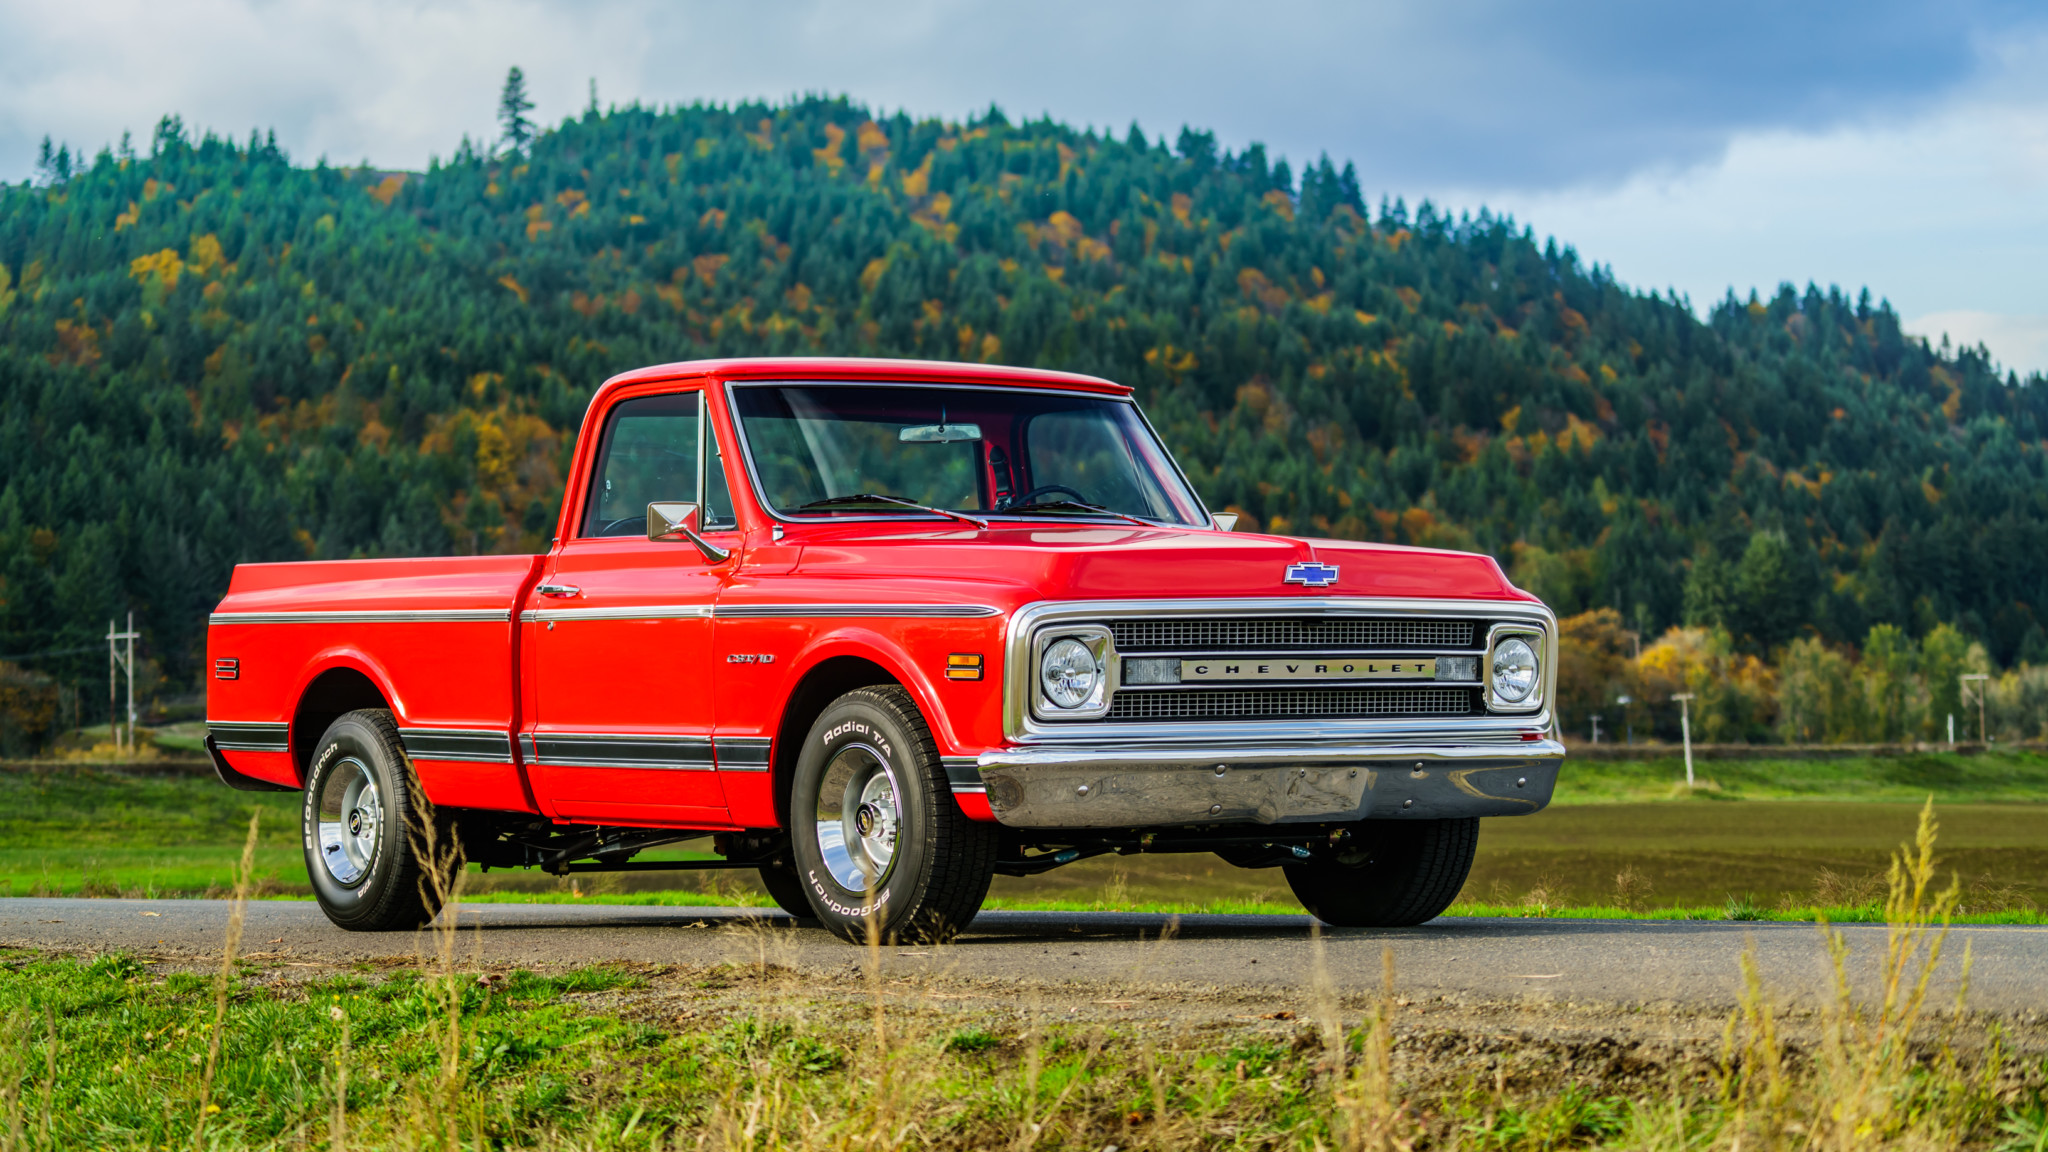 Download wallpapers Chevrolet C10 tuning 1967 cars retro cars lowrider  customized C10 1967 Chevrolet C10 pickup truck american cars Chevrolet  for desktop free Pictures for desktop free